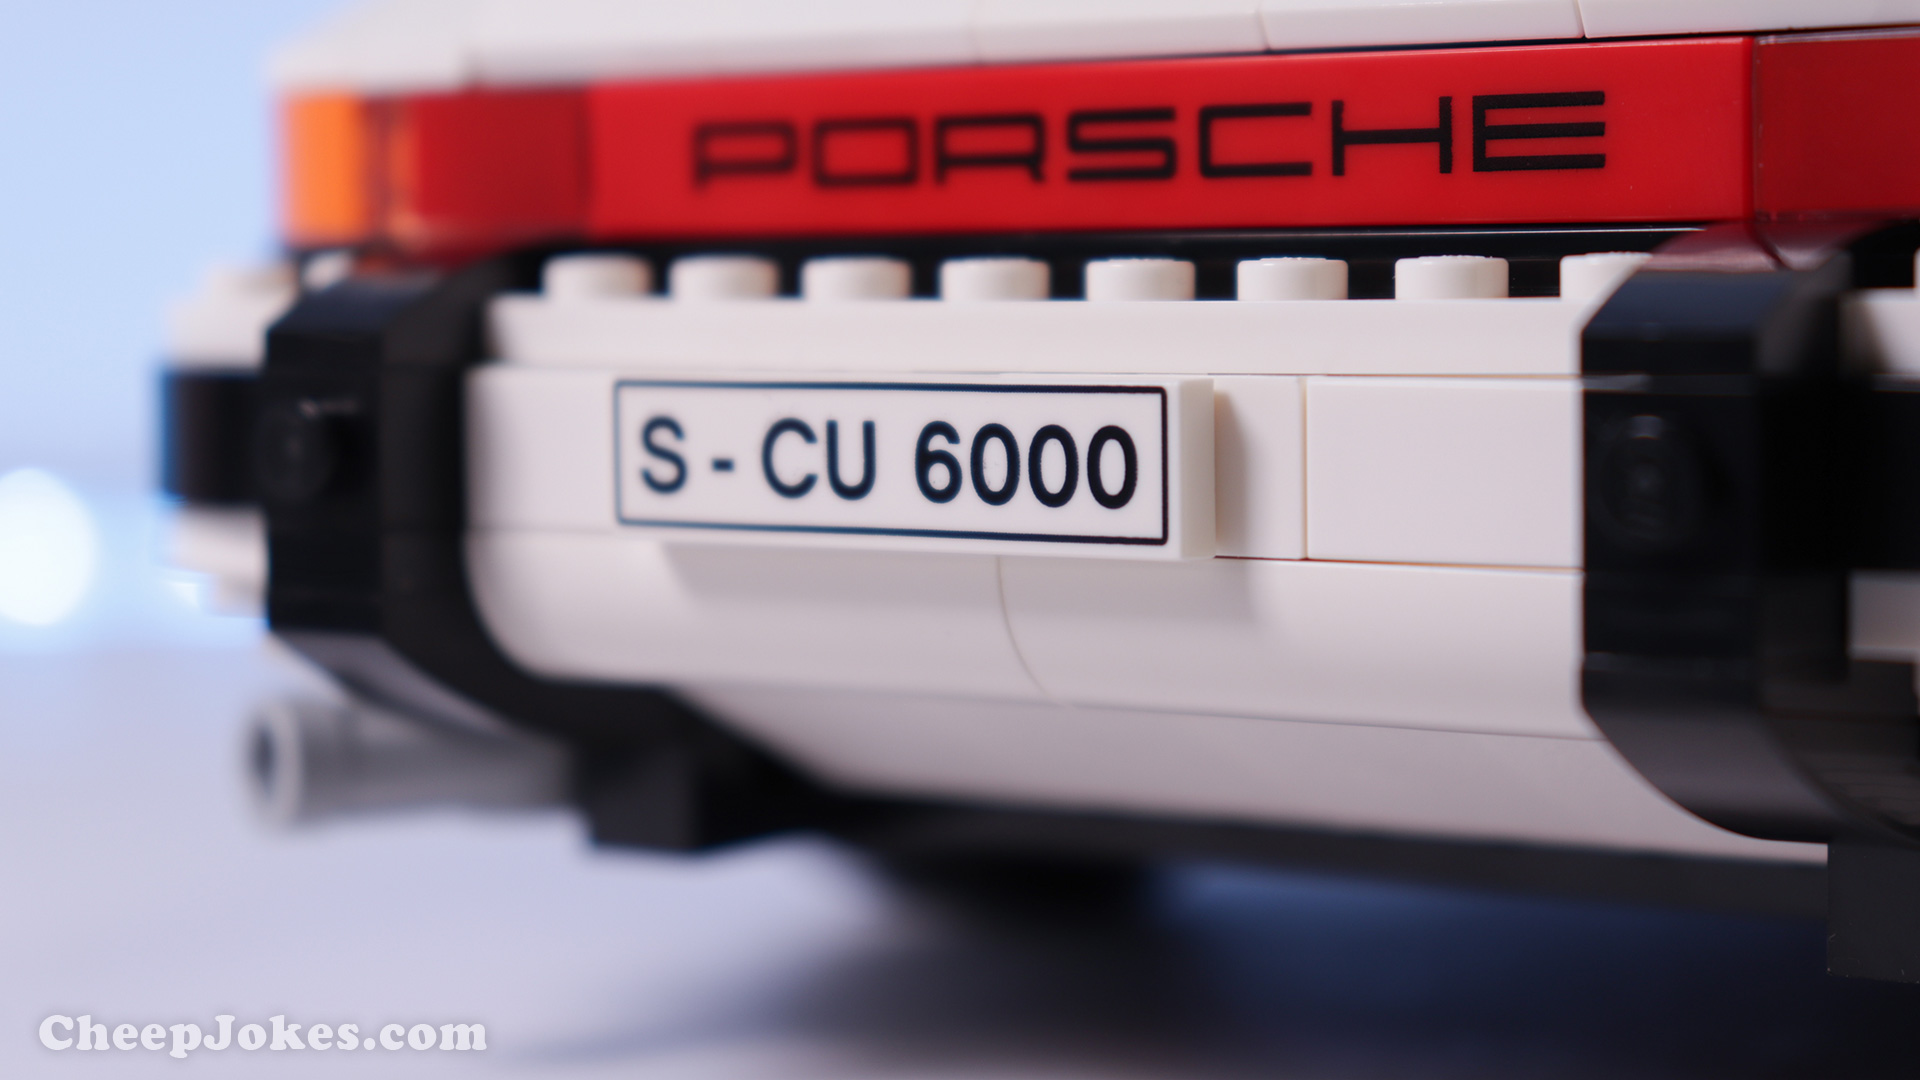 The LEGO® Group has taken the covers off a new LEGO version of one of the most coveted nameplates in automotive history, with the unveiling of the two-in-one LEGO Porsche 911 Turbo and 911 Targa set that brings together two icons from the 1970s and 80s.